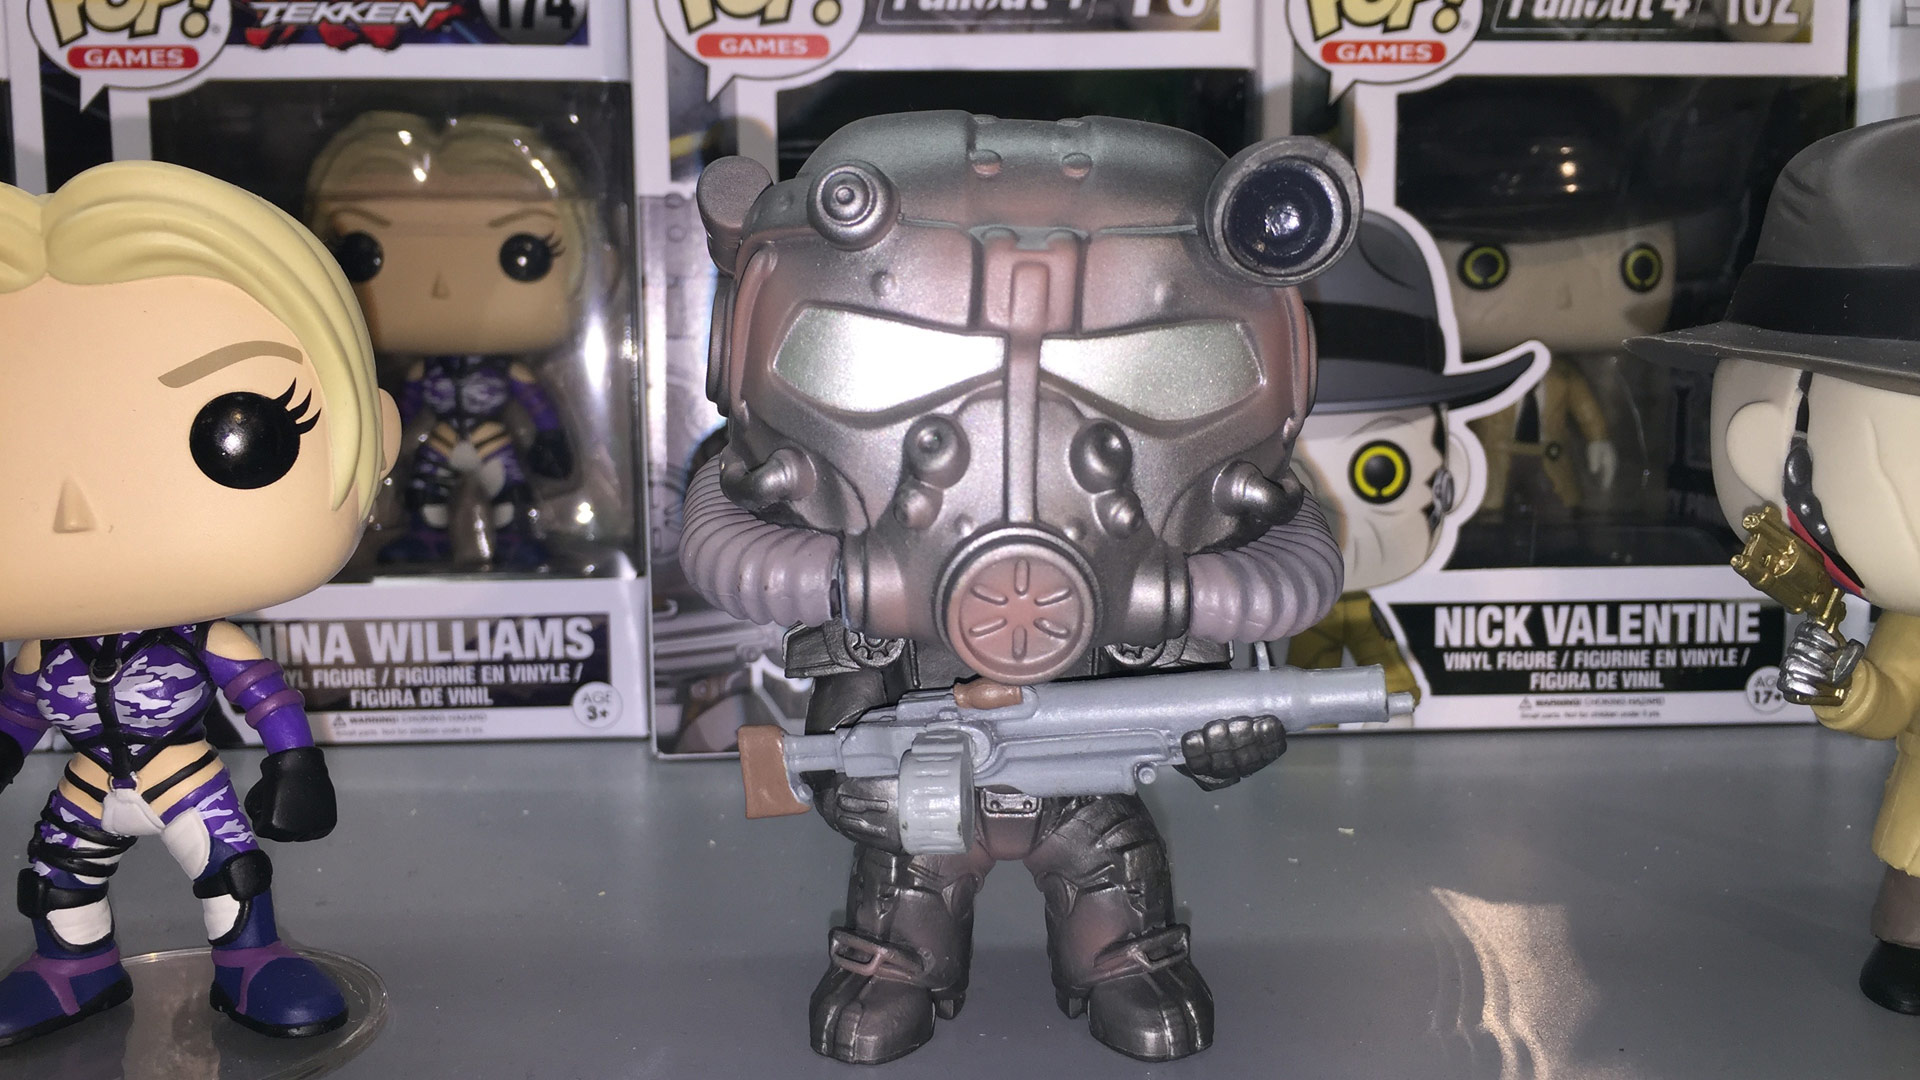 Funko Pop Fallout 4 with T-60 Power Armor #78 Vinyl Figure at Toy Fair 2017